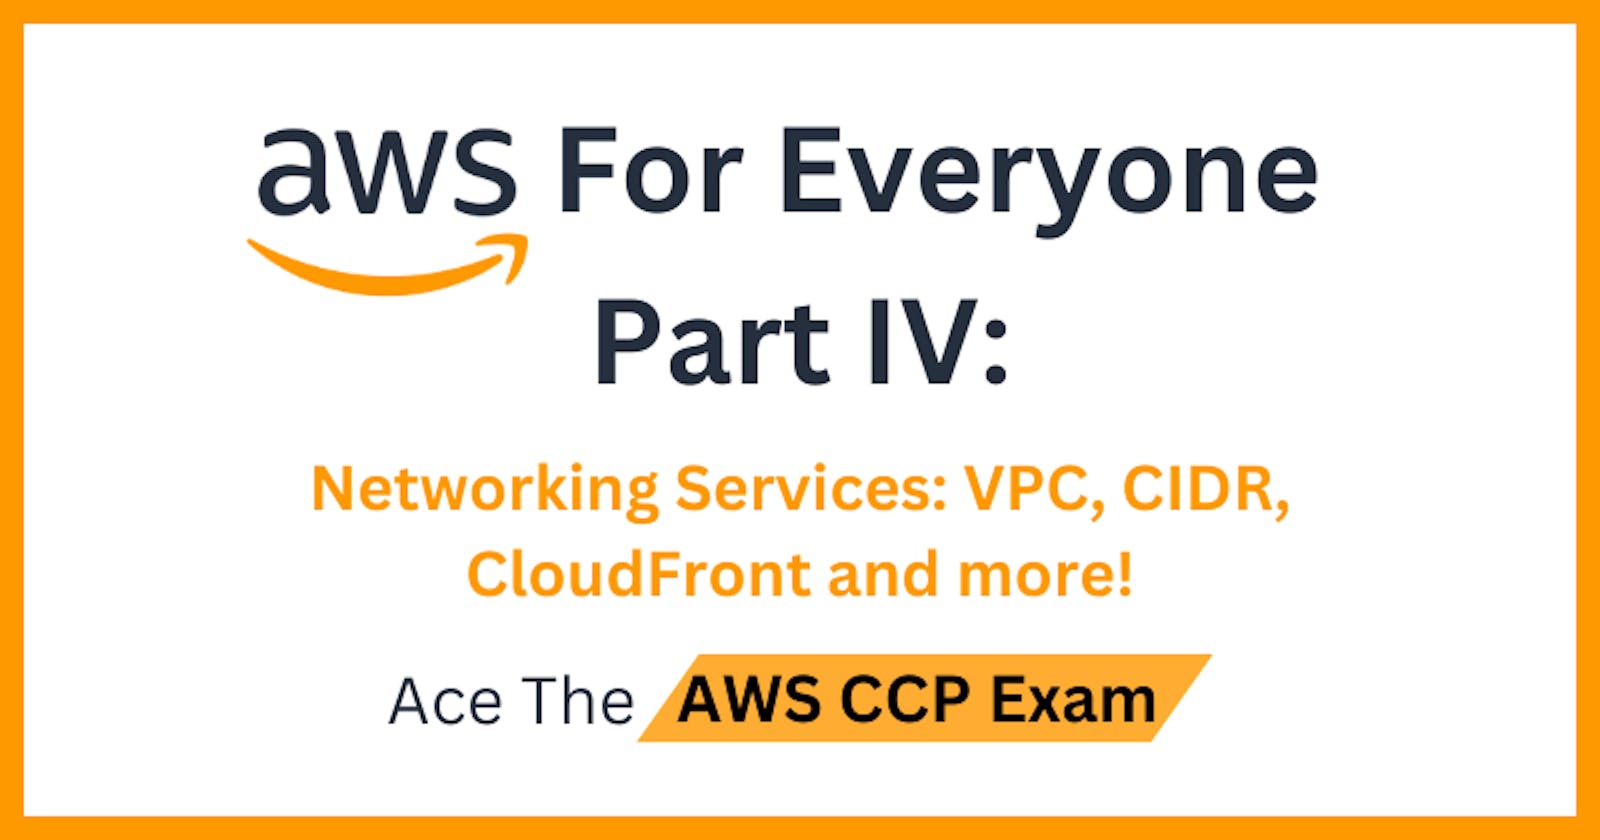 AWS For Everyone - Part IV: Networking Services, VPC, CIDR, CloudFront and more!